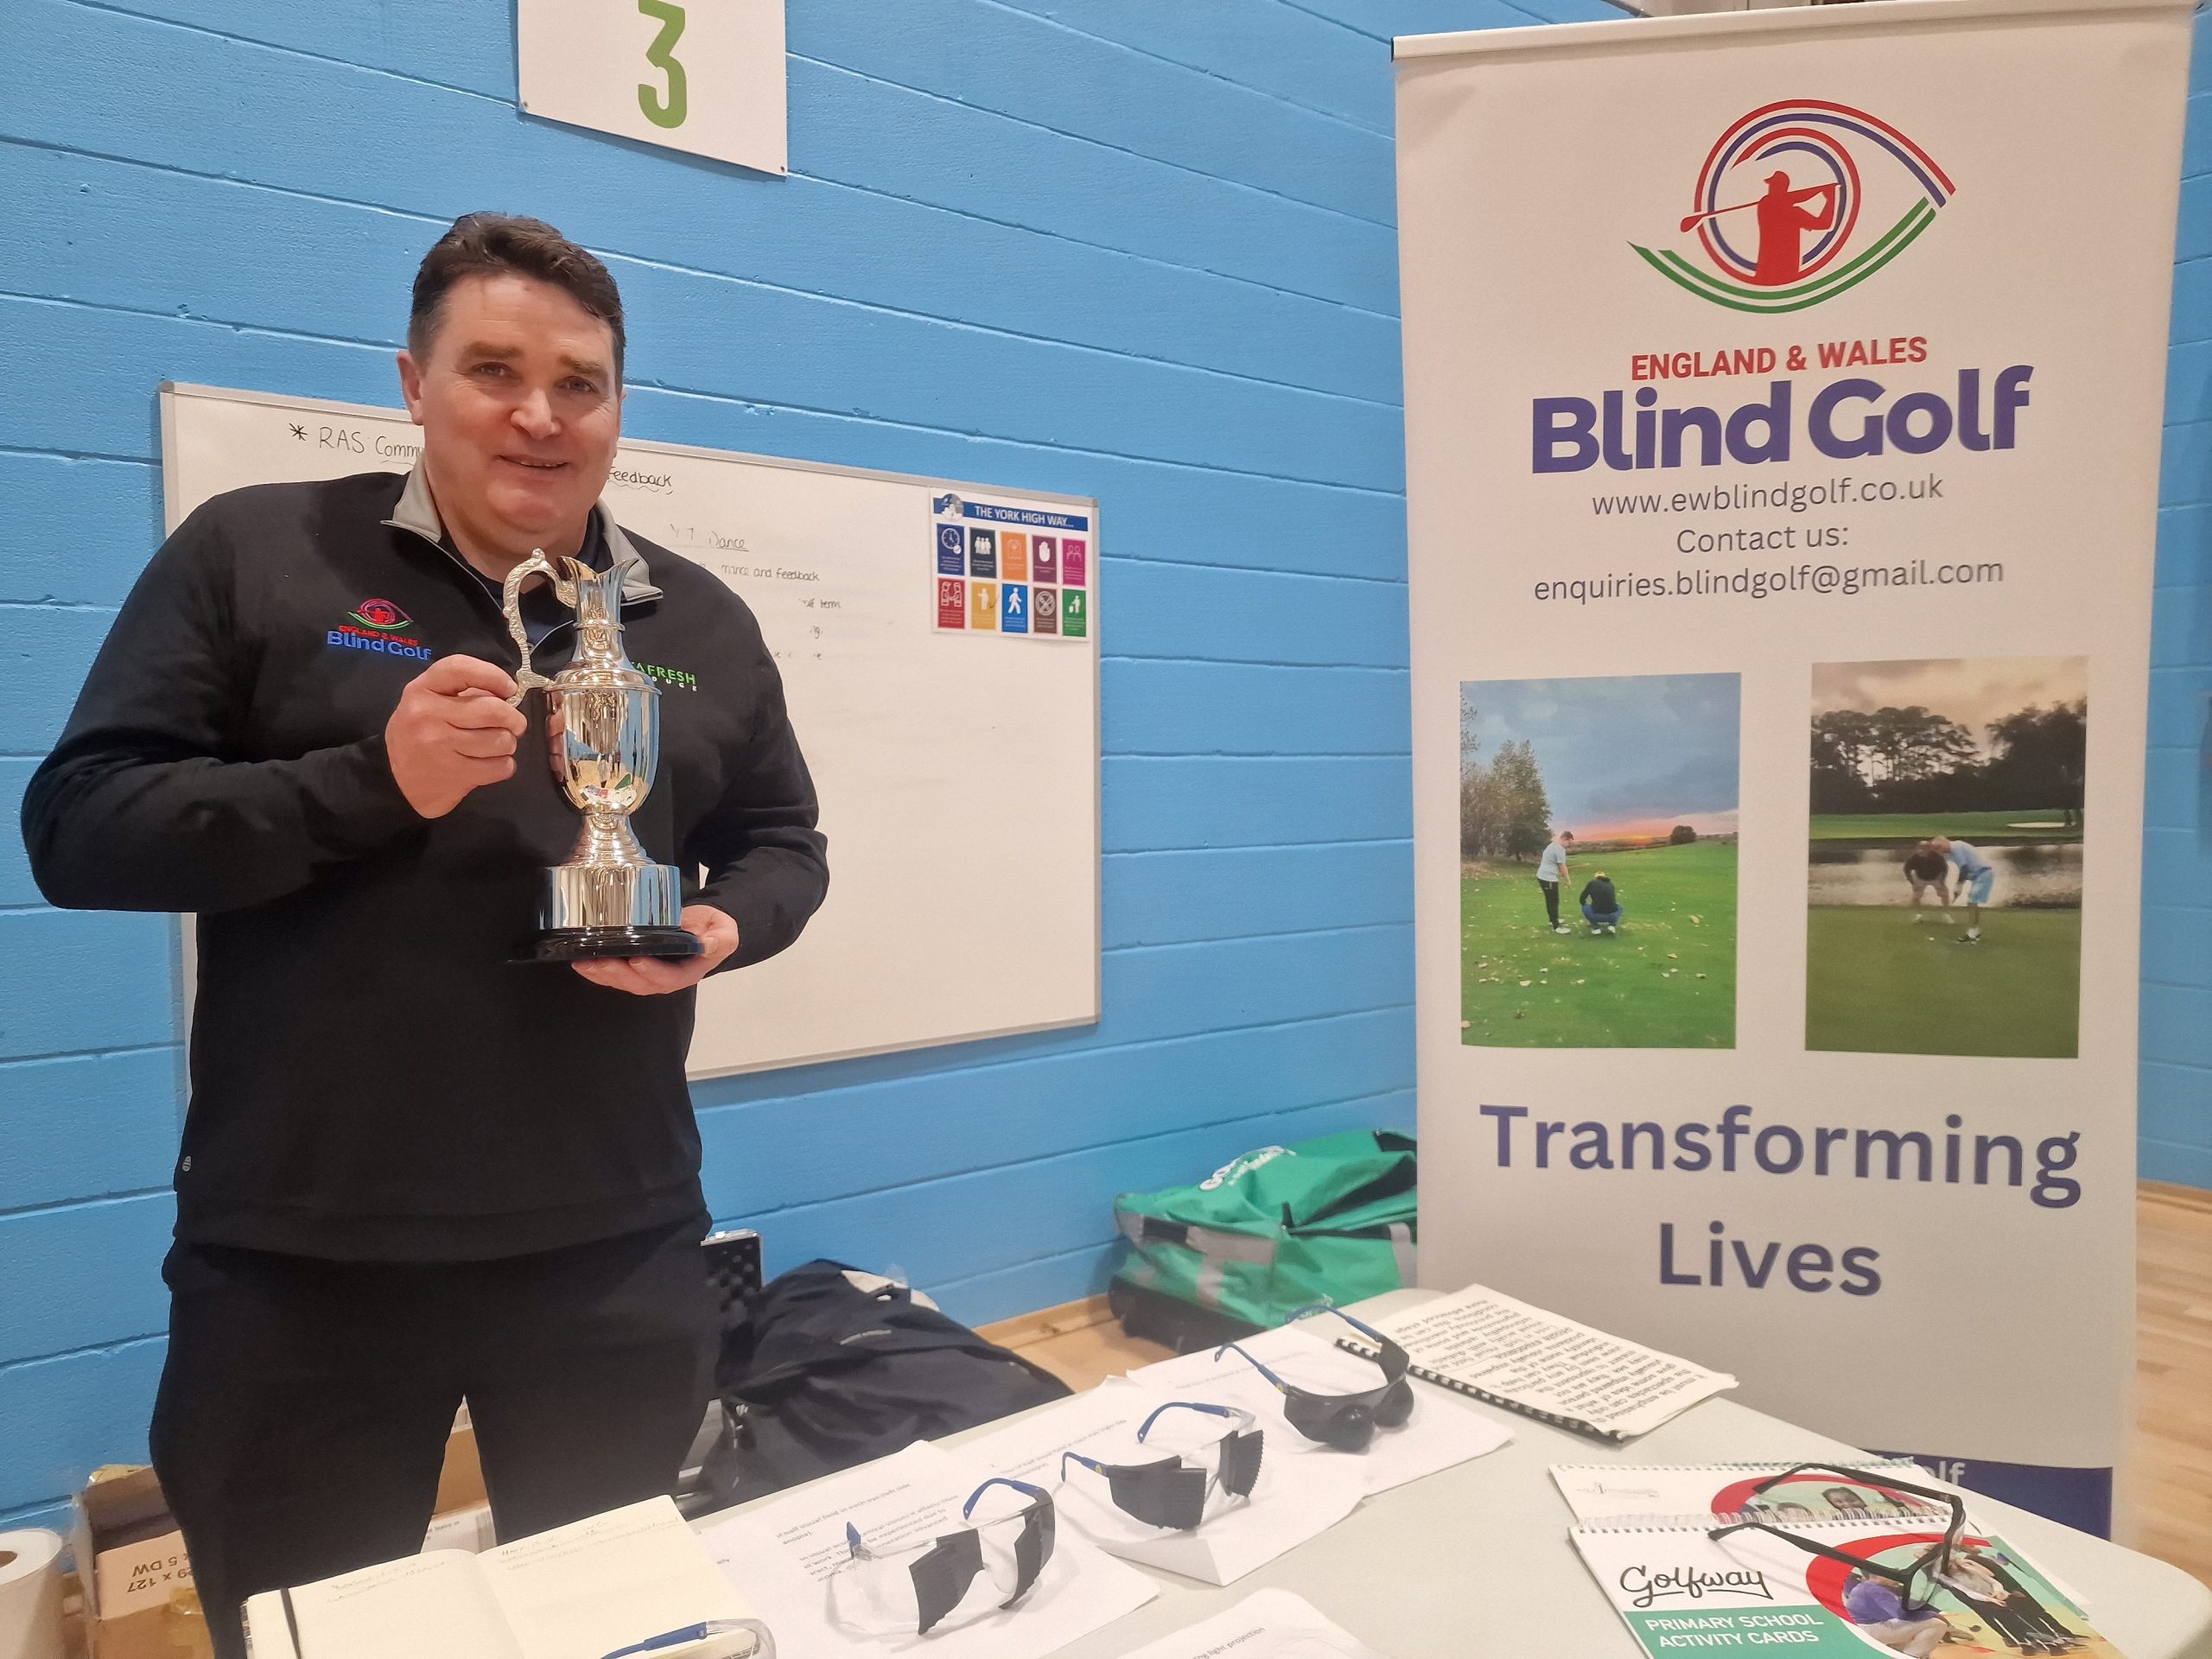 Stuart Hutcheson, British Blind Open Golf champion, and Irish open champion, stood at the British Blind Golf information stall, holding his trophy.